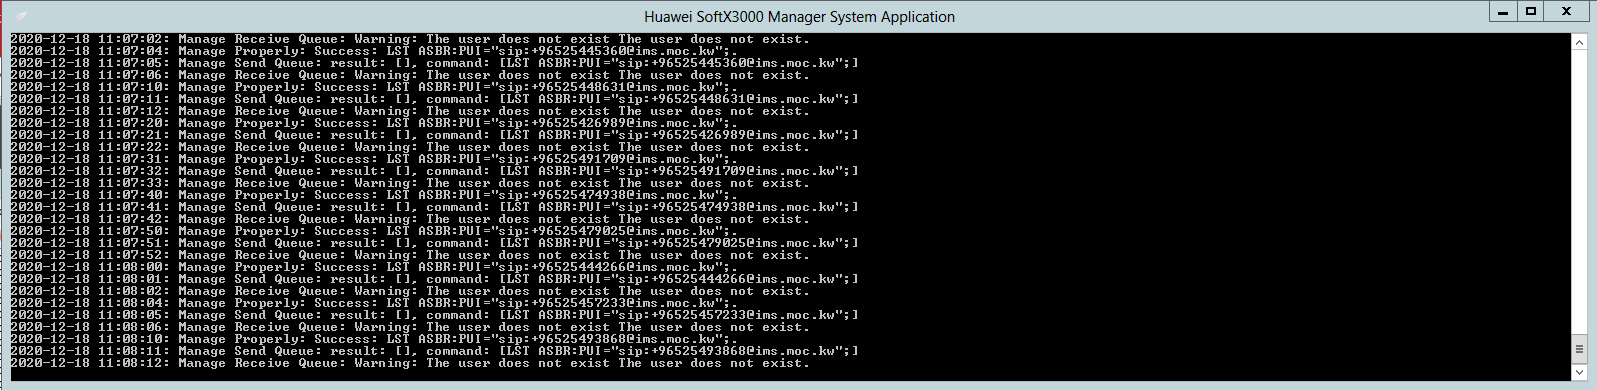 Huawei's SoftX3000 Manager Application